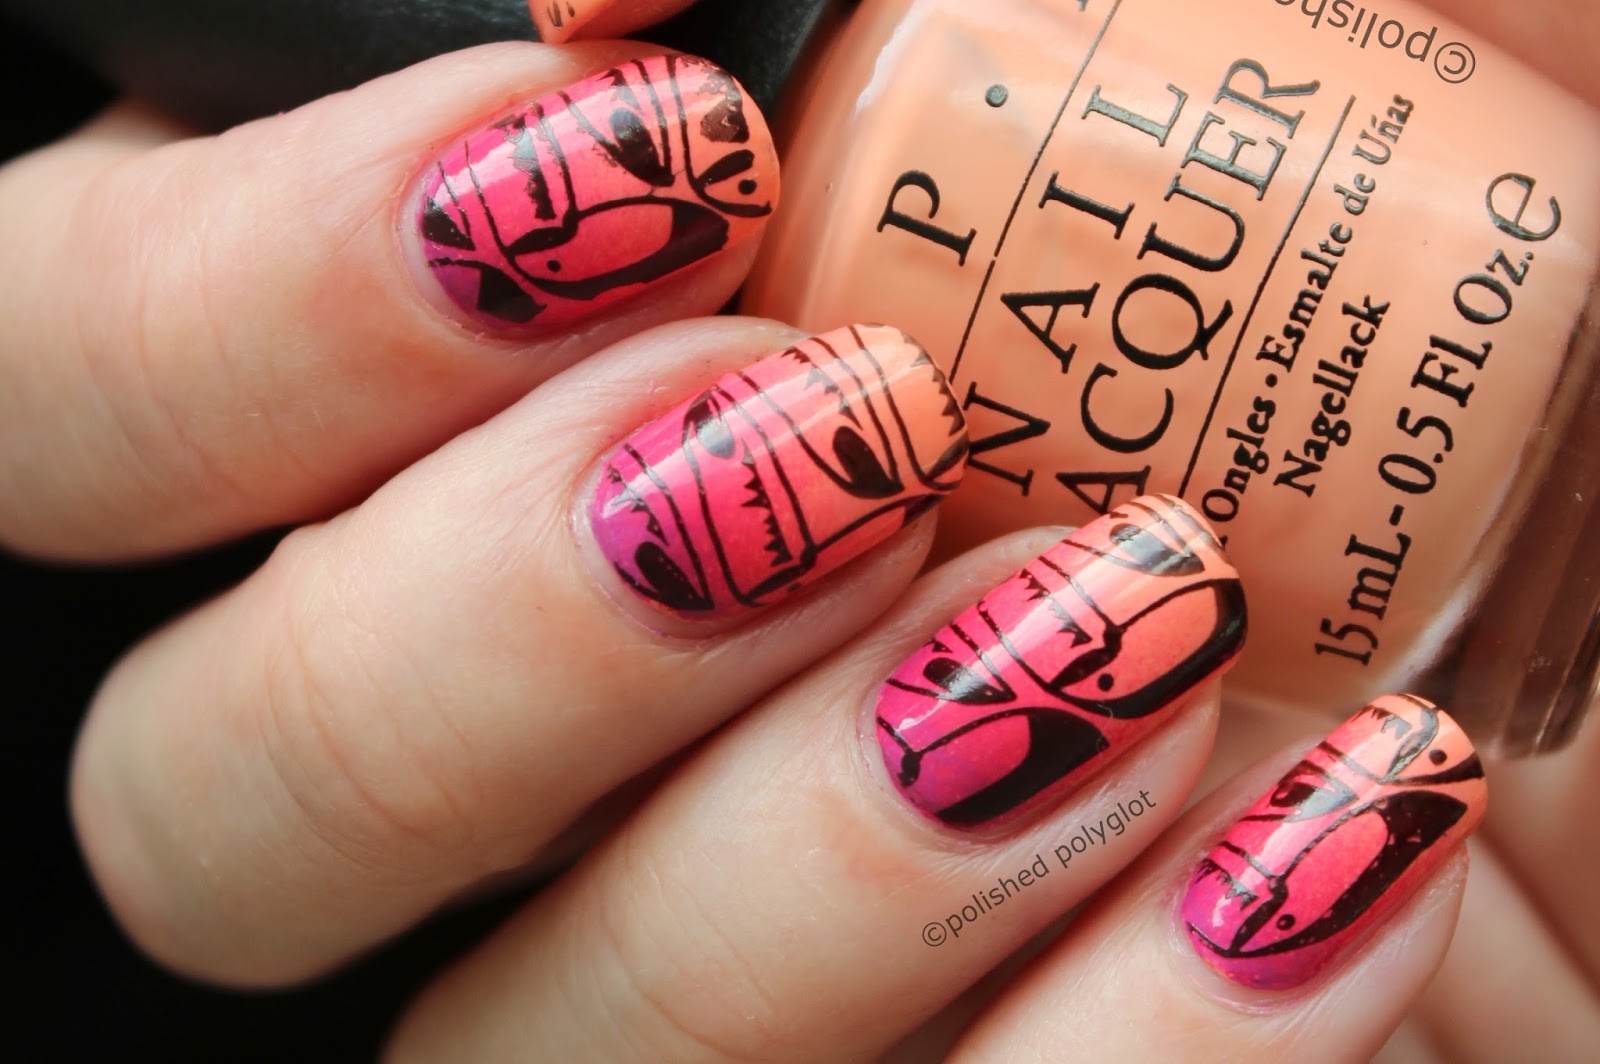 NOTD │Summery manicure with Toucans & sunsets / Polished Polyglot